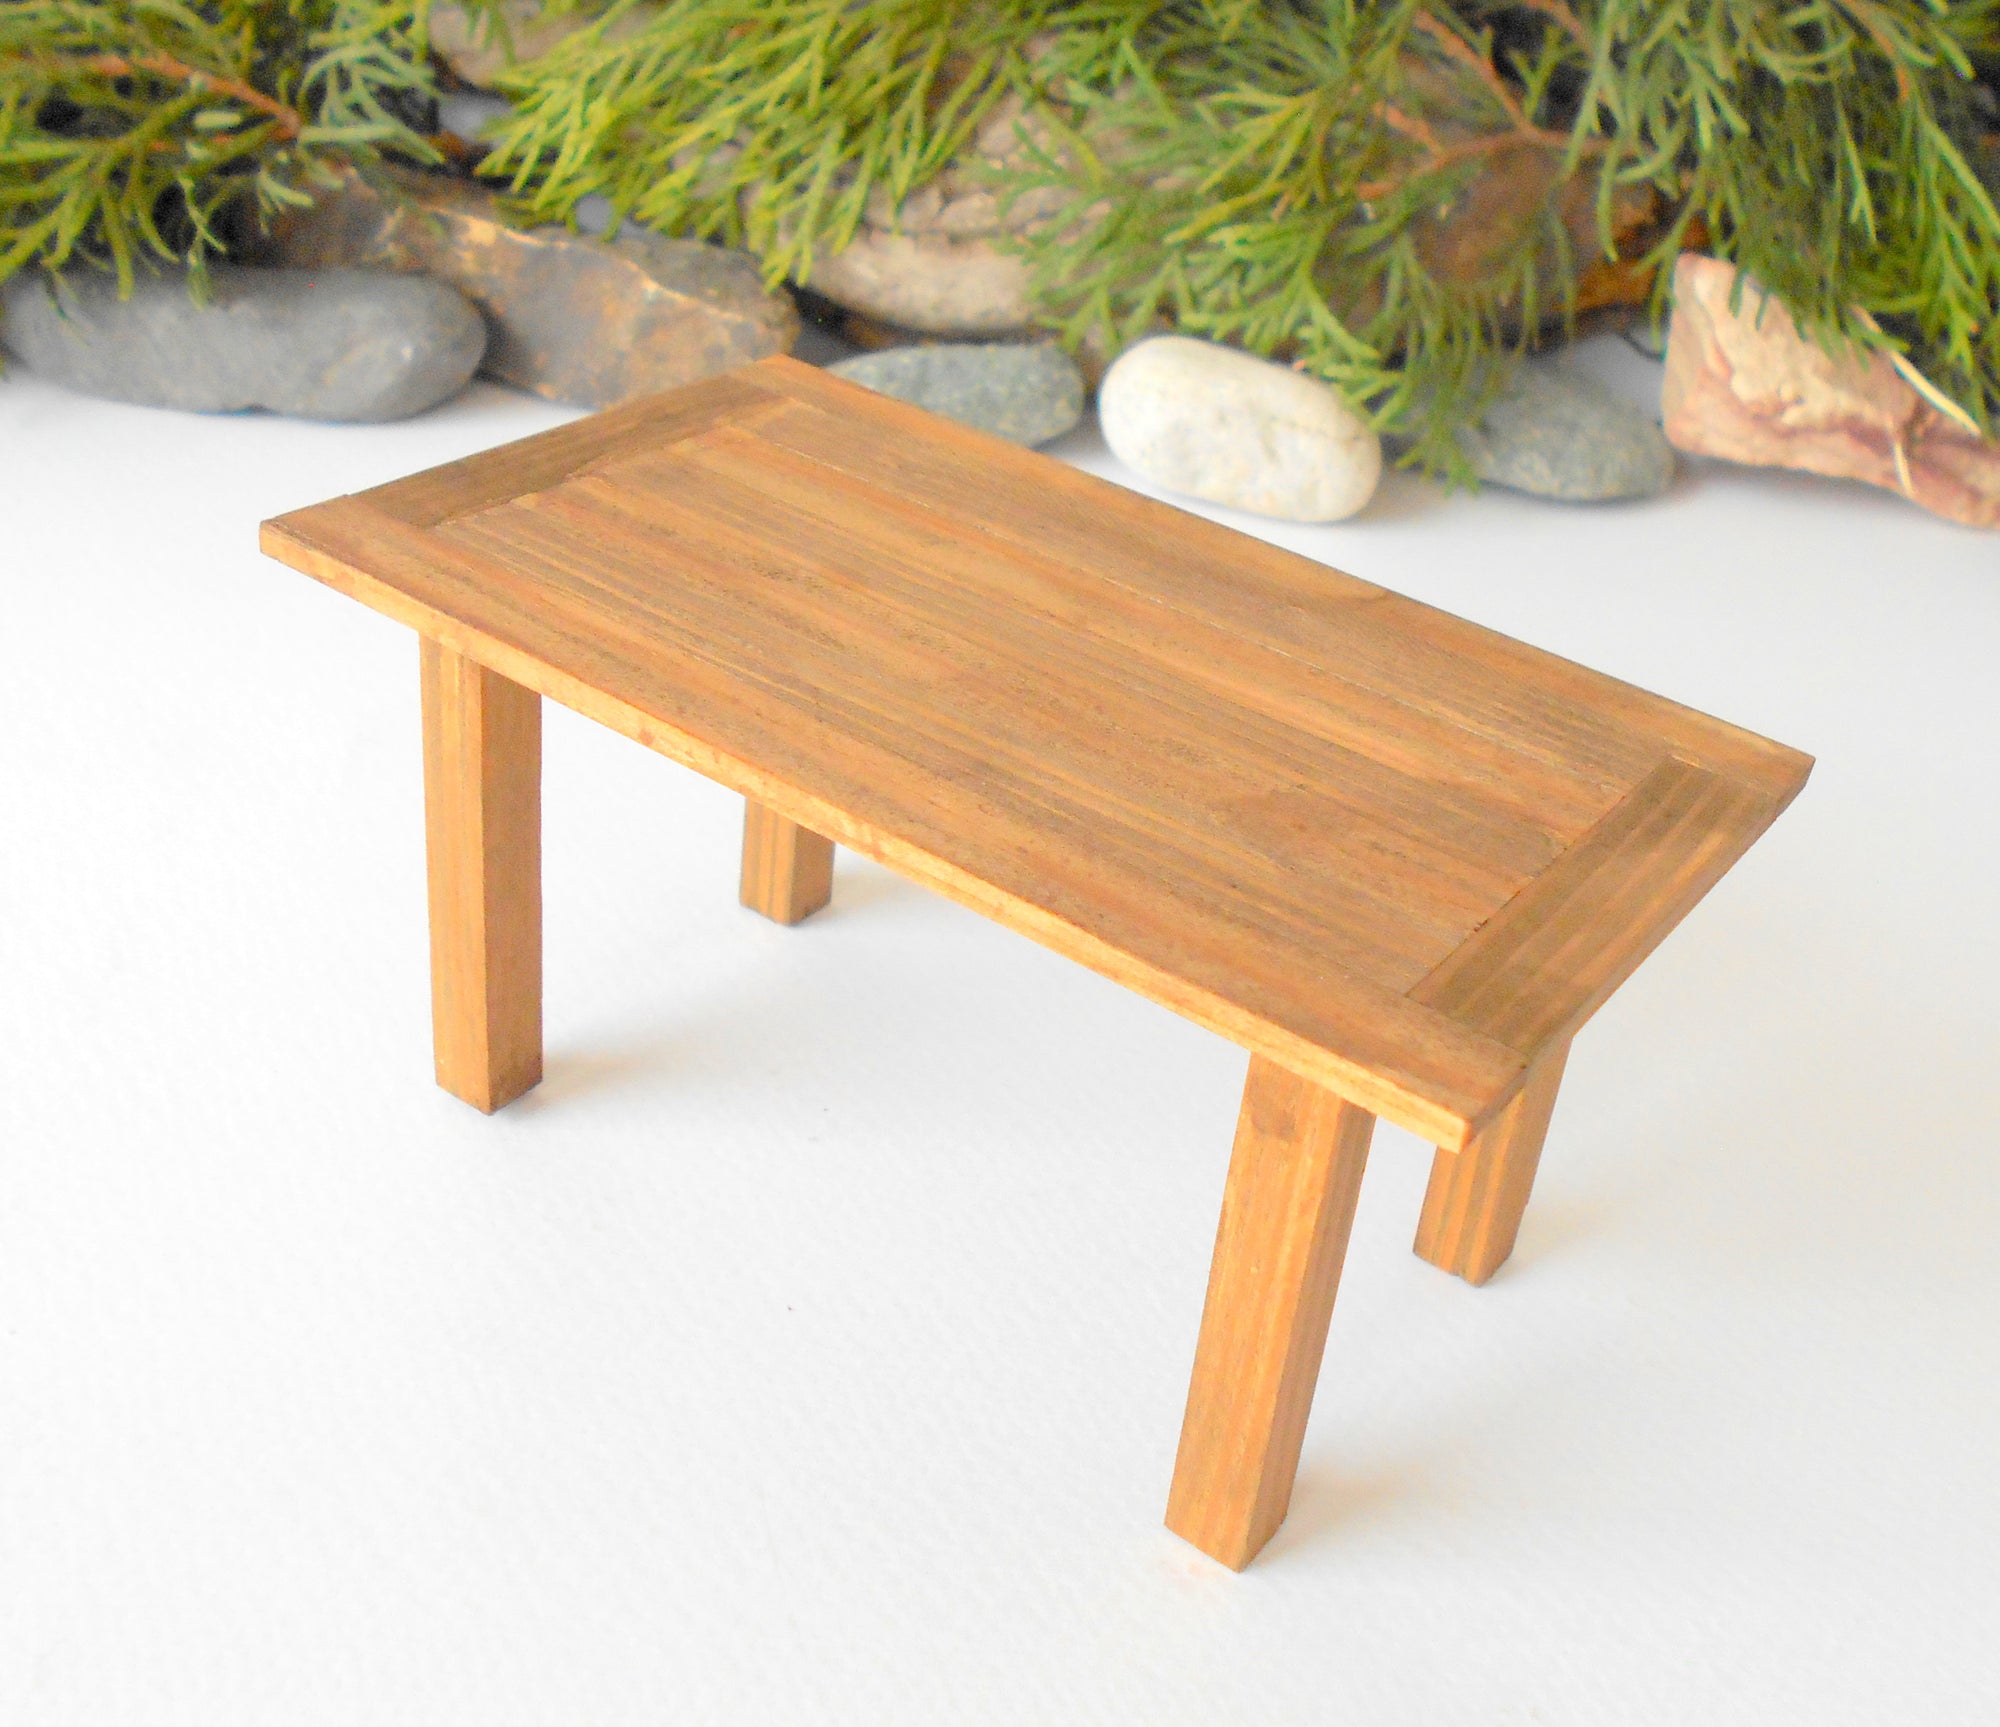 This is a handmade miniature dining or kitchen table on a&nbsp;<span data-mce-fragment="1">1/12</span><span data-mce-fragment="1">th</span> scale that is suitable for 6 mini chairs on a 1/12th scale. I handmade this table on order with real pine wood boards and beams and with water-based eco-friendly glue. I have stained that table with Italian eco-friendly mordant in light brown.